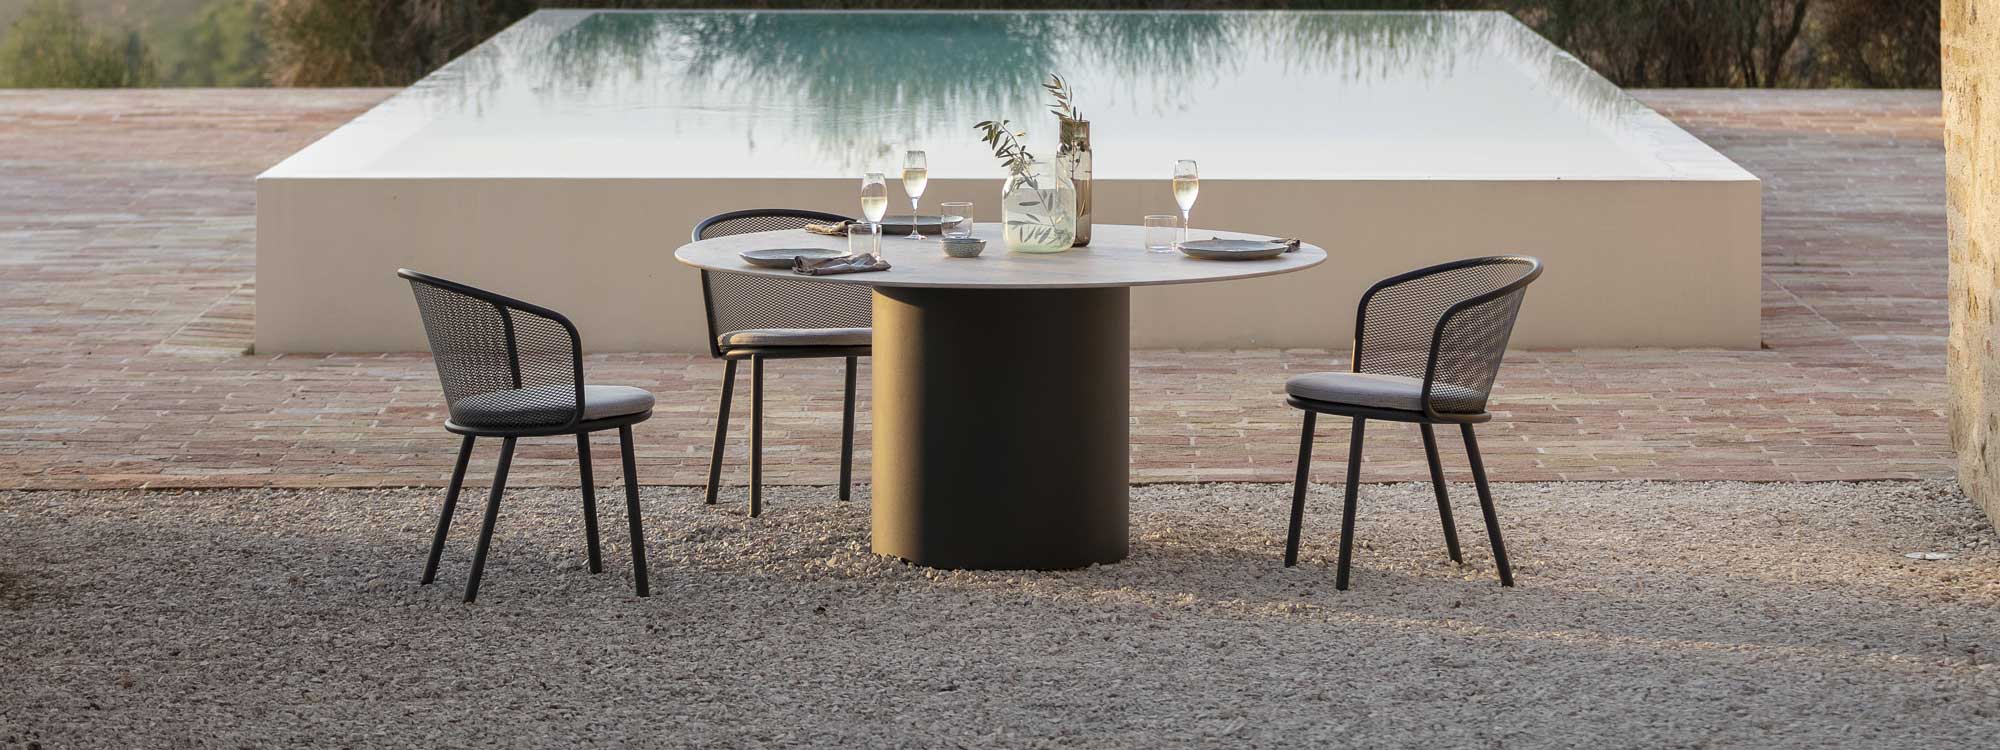 Branta round garden dining table and Baza garden dining chairs on terrace in early evening light